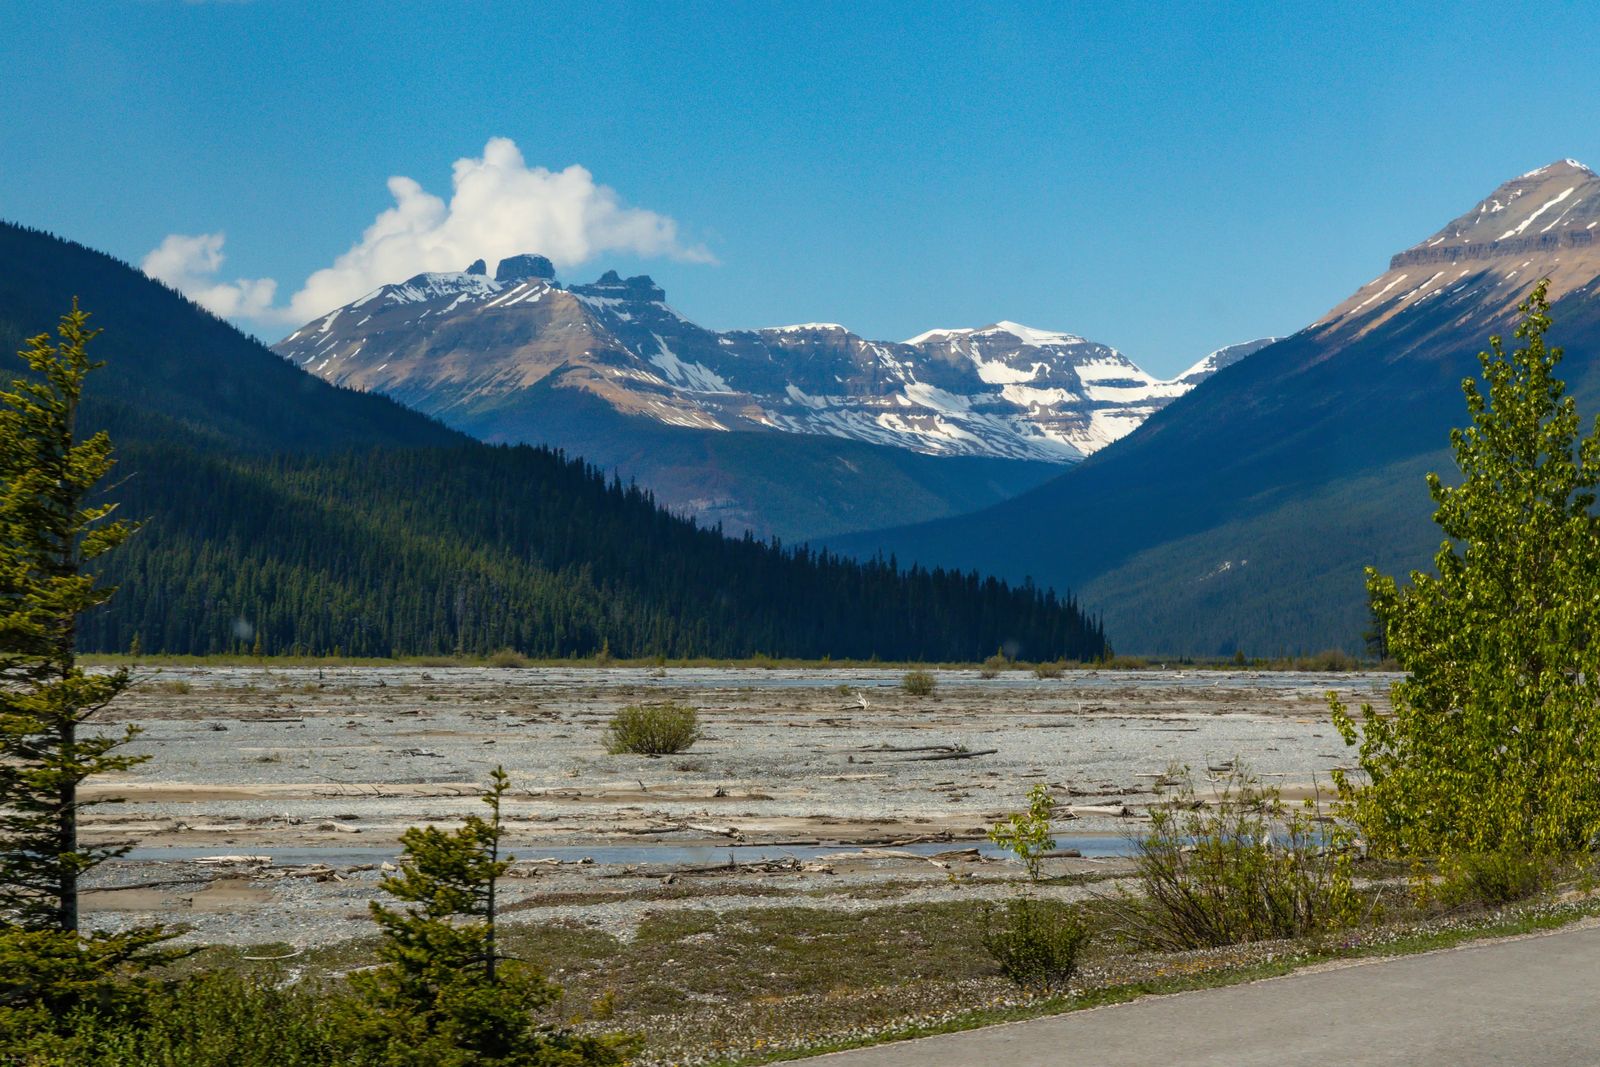 Sunwapta Valley - The BEST of the Icefields Parkway Banff